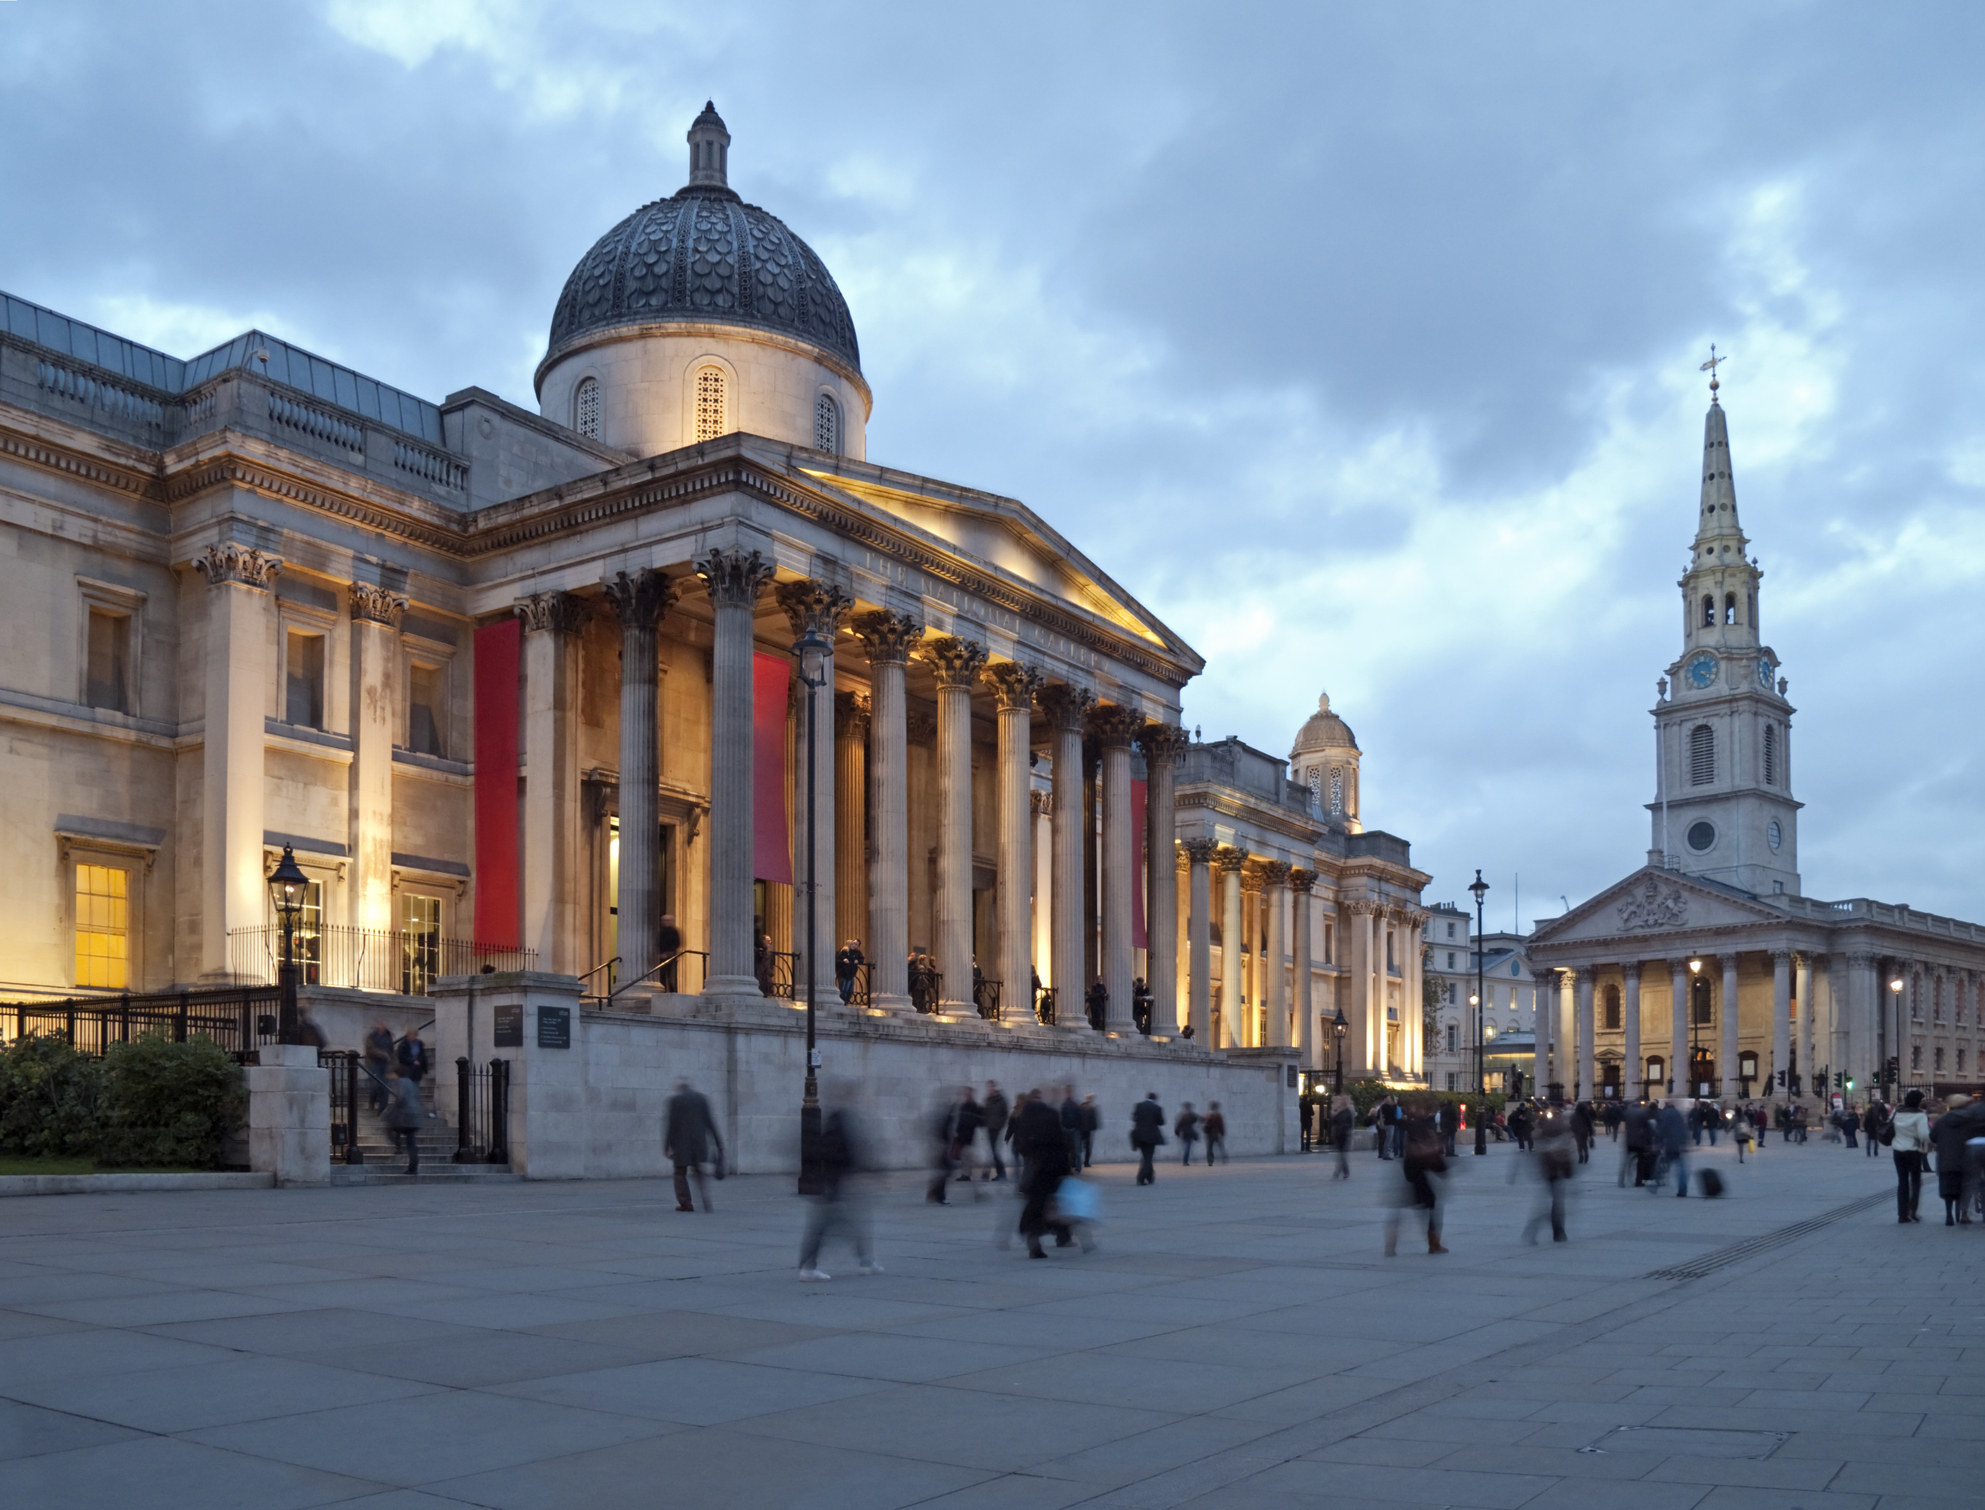 The National Gallery in London at dusk